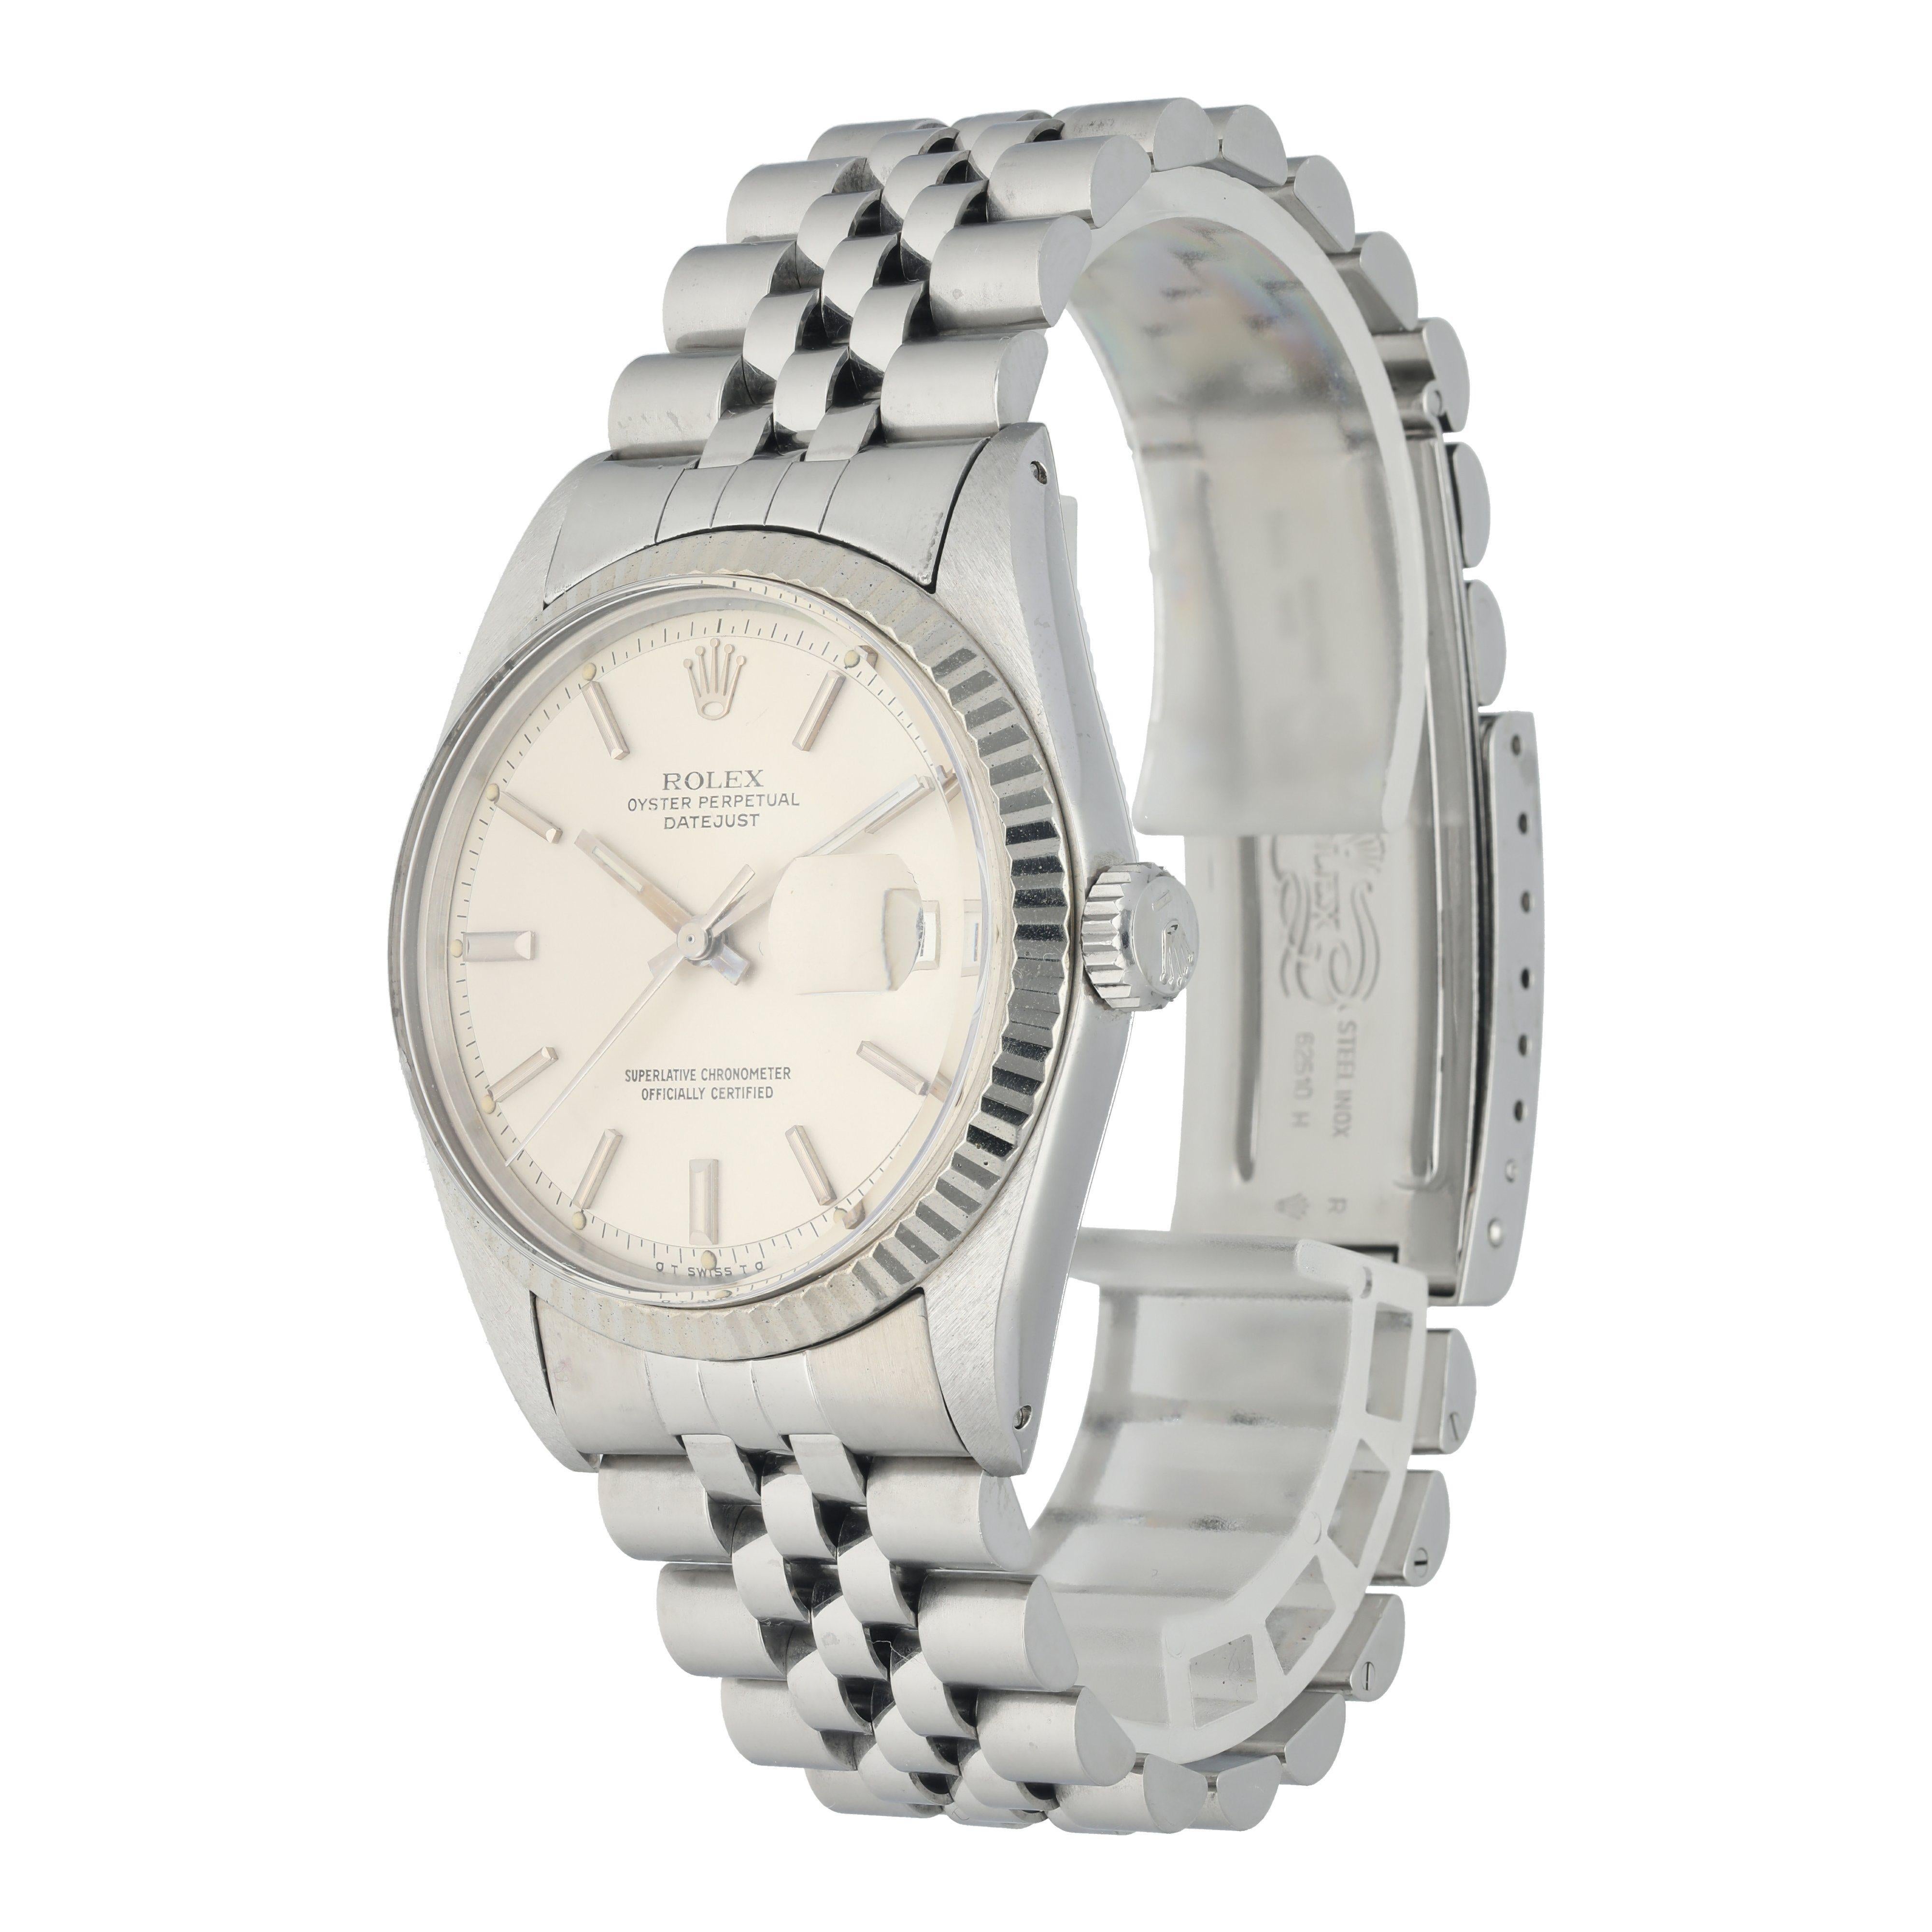 Rolex Oyster Perpetual Datejust 1601 Men's Watch. 
36mm stainless steel case with a white gold fluted bezel. 
Silver dial with steel hands and index hour markers. 
Minute markers around the outer dial.
Date display at the 3 o'clock position.